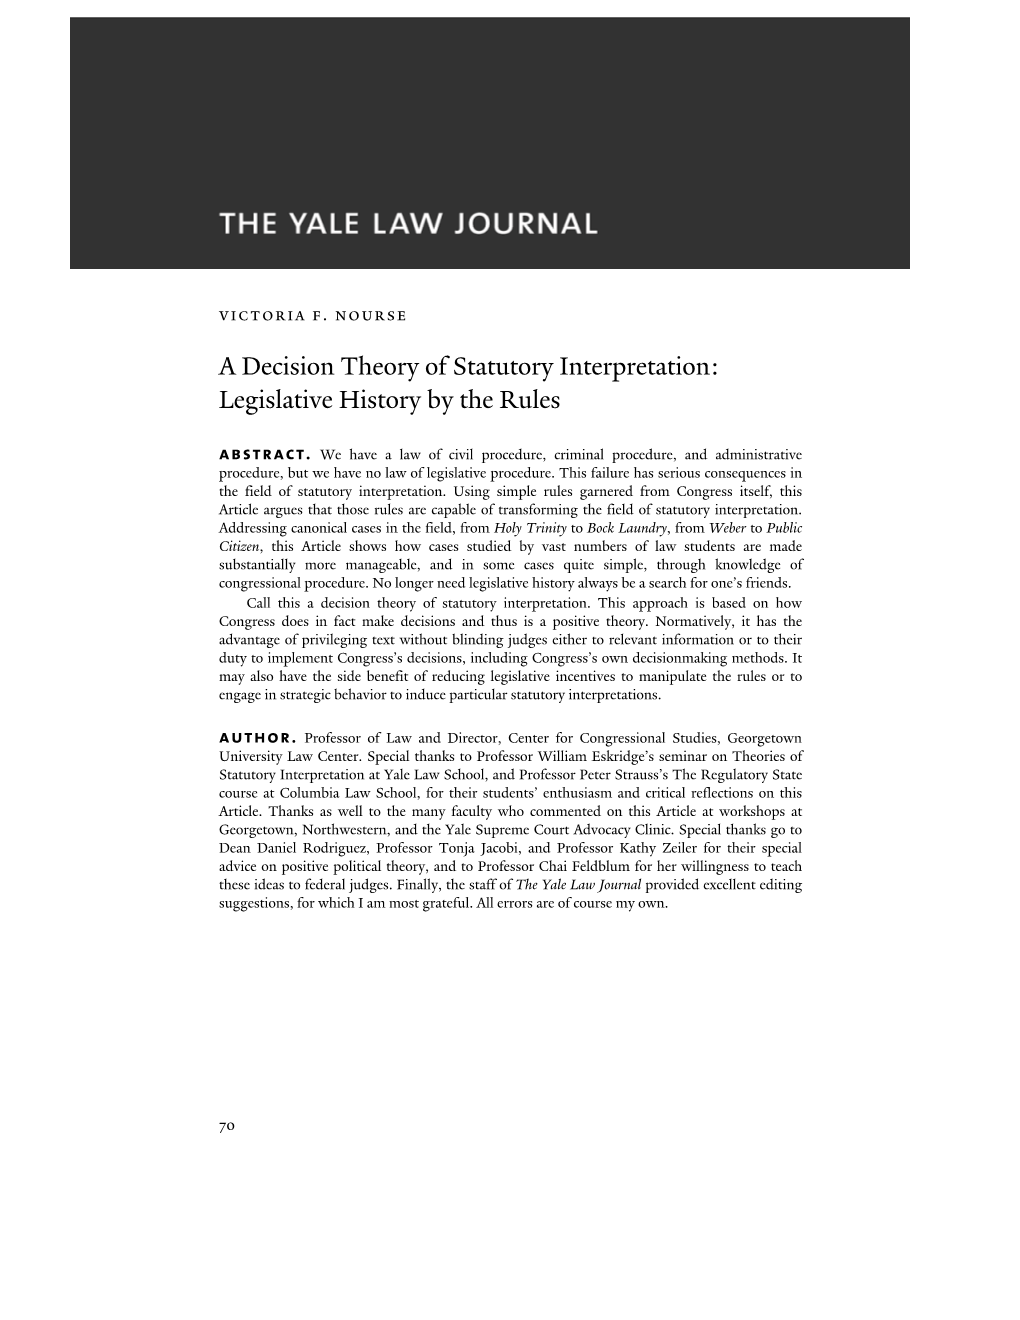 Legislative History by the Rules Abstract